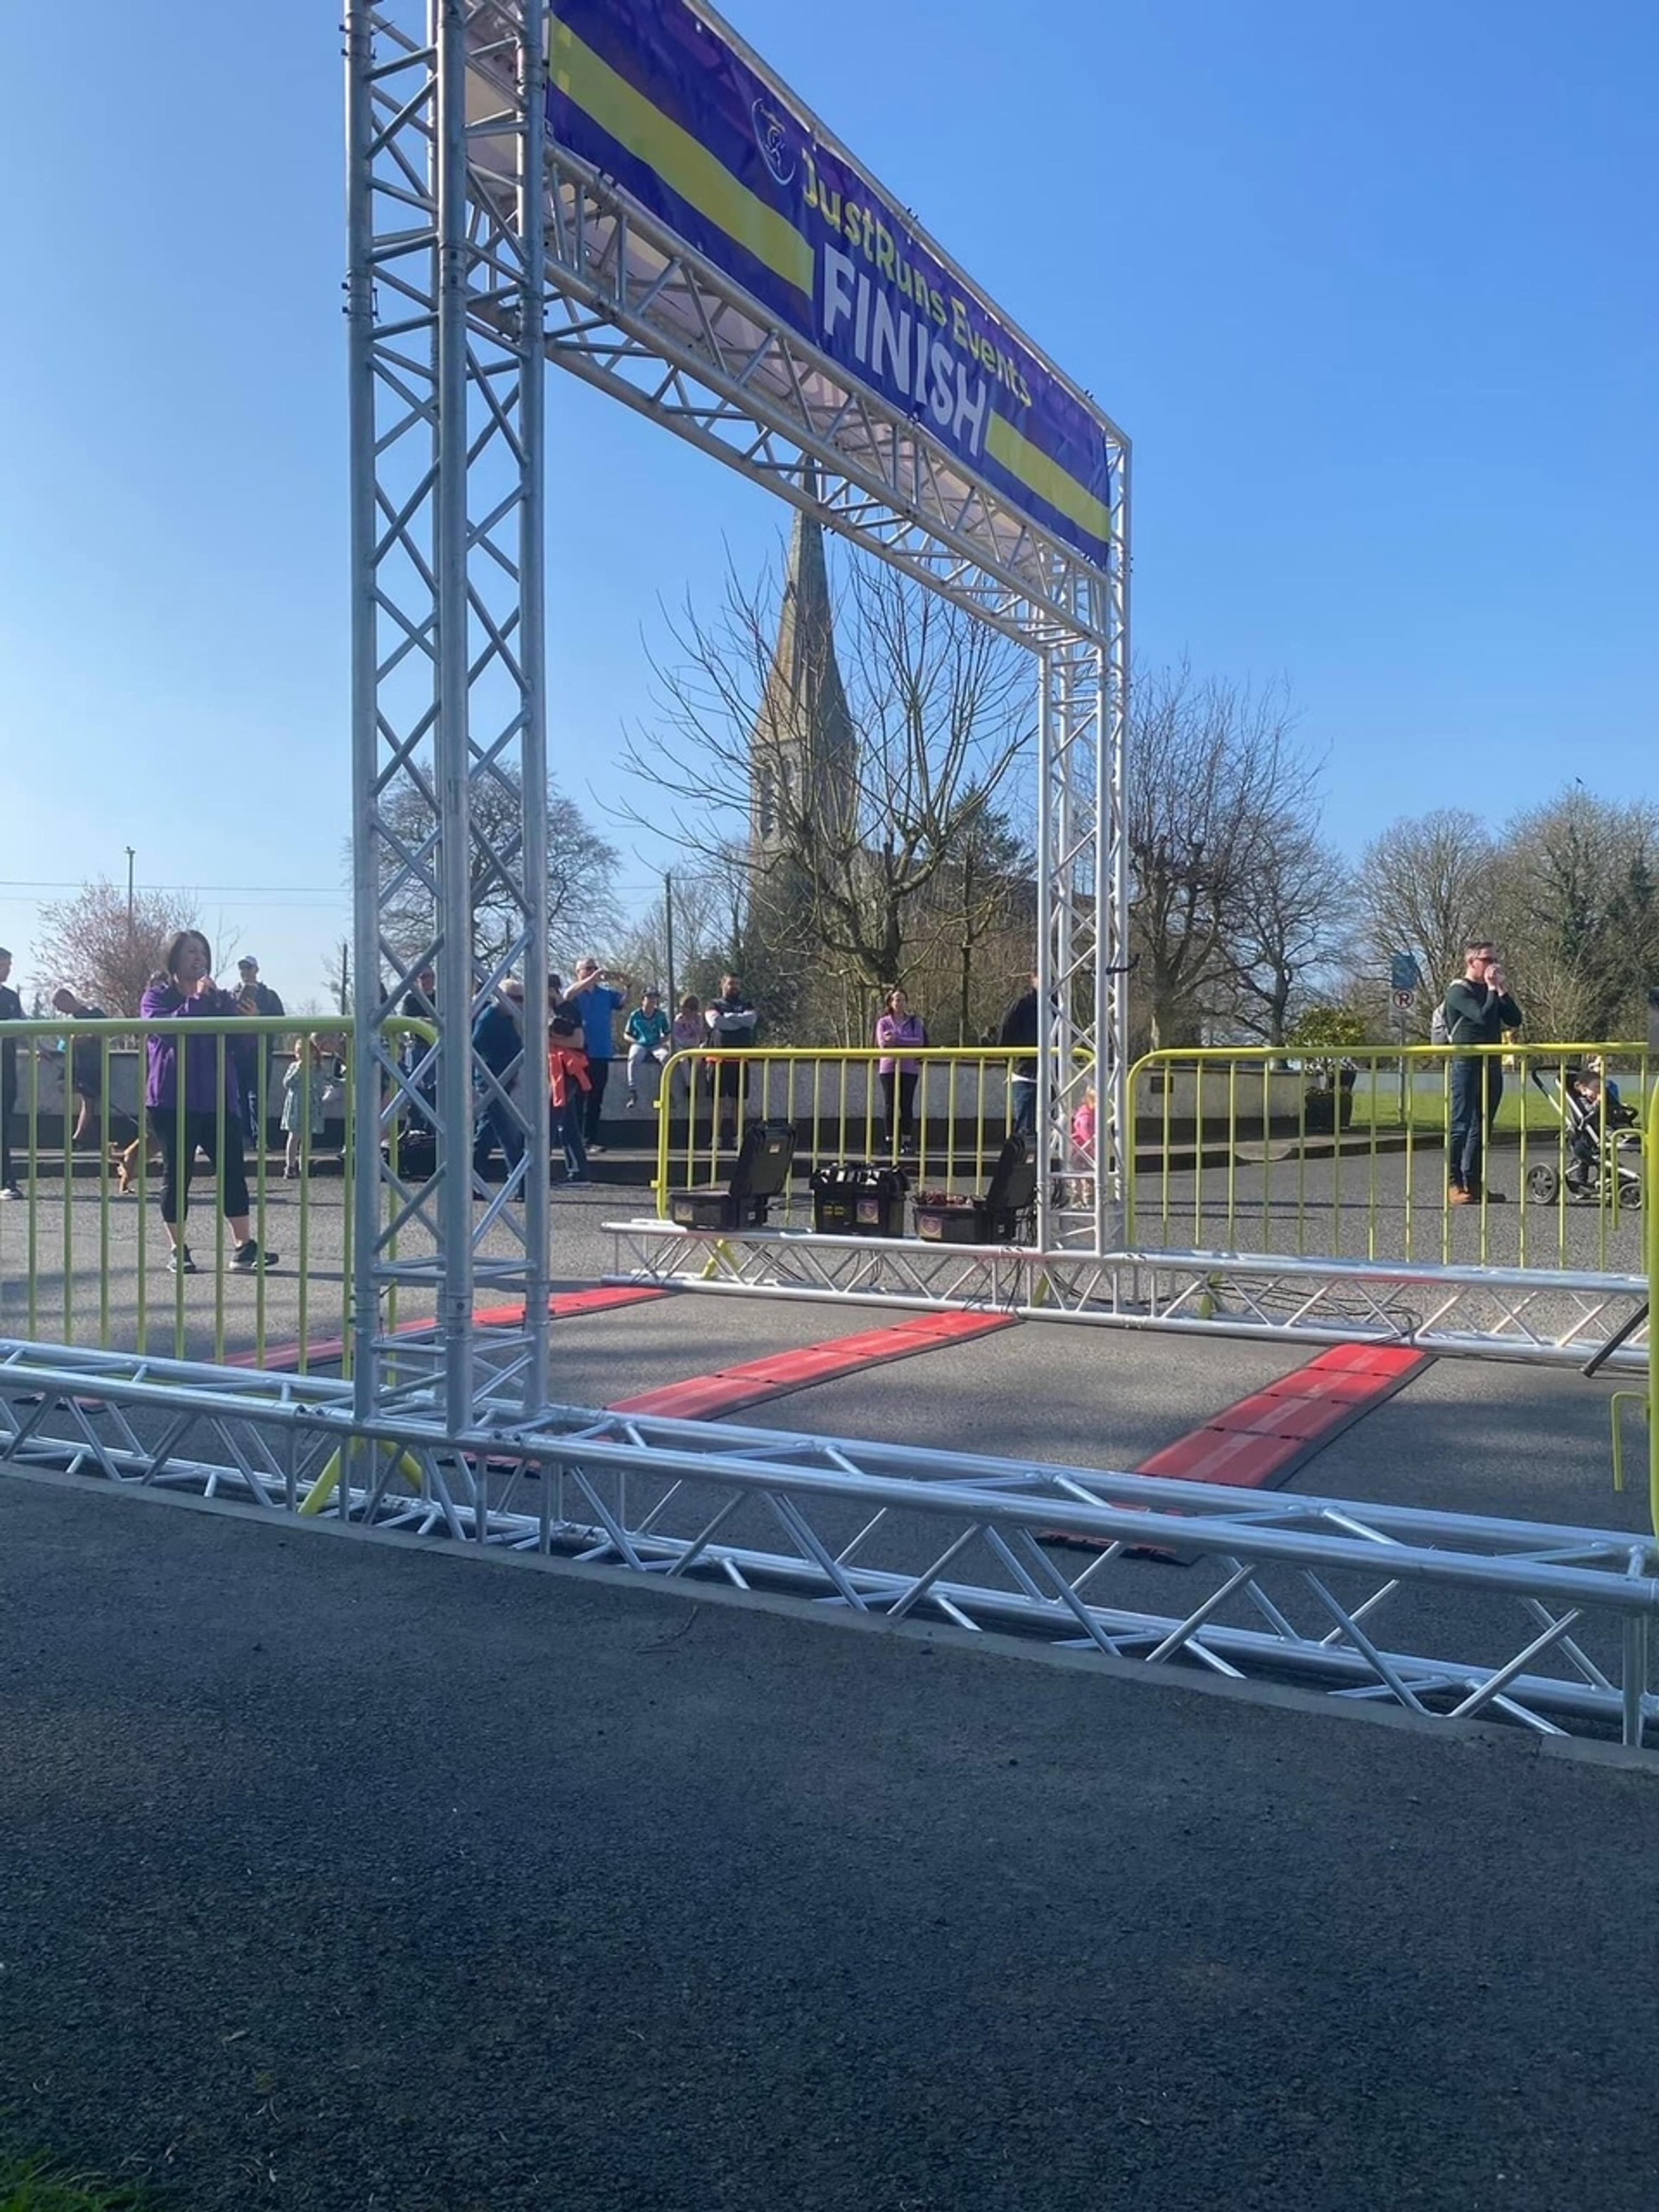 Race Gantry in Kildare town chip timing race timing